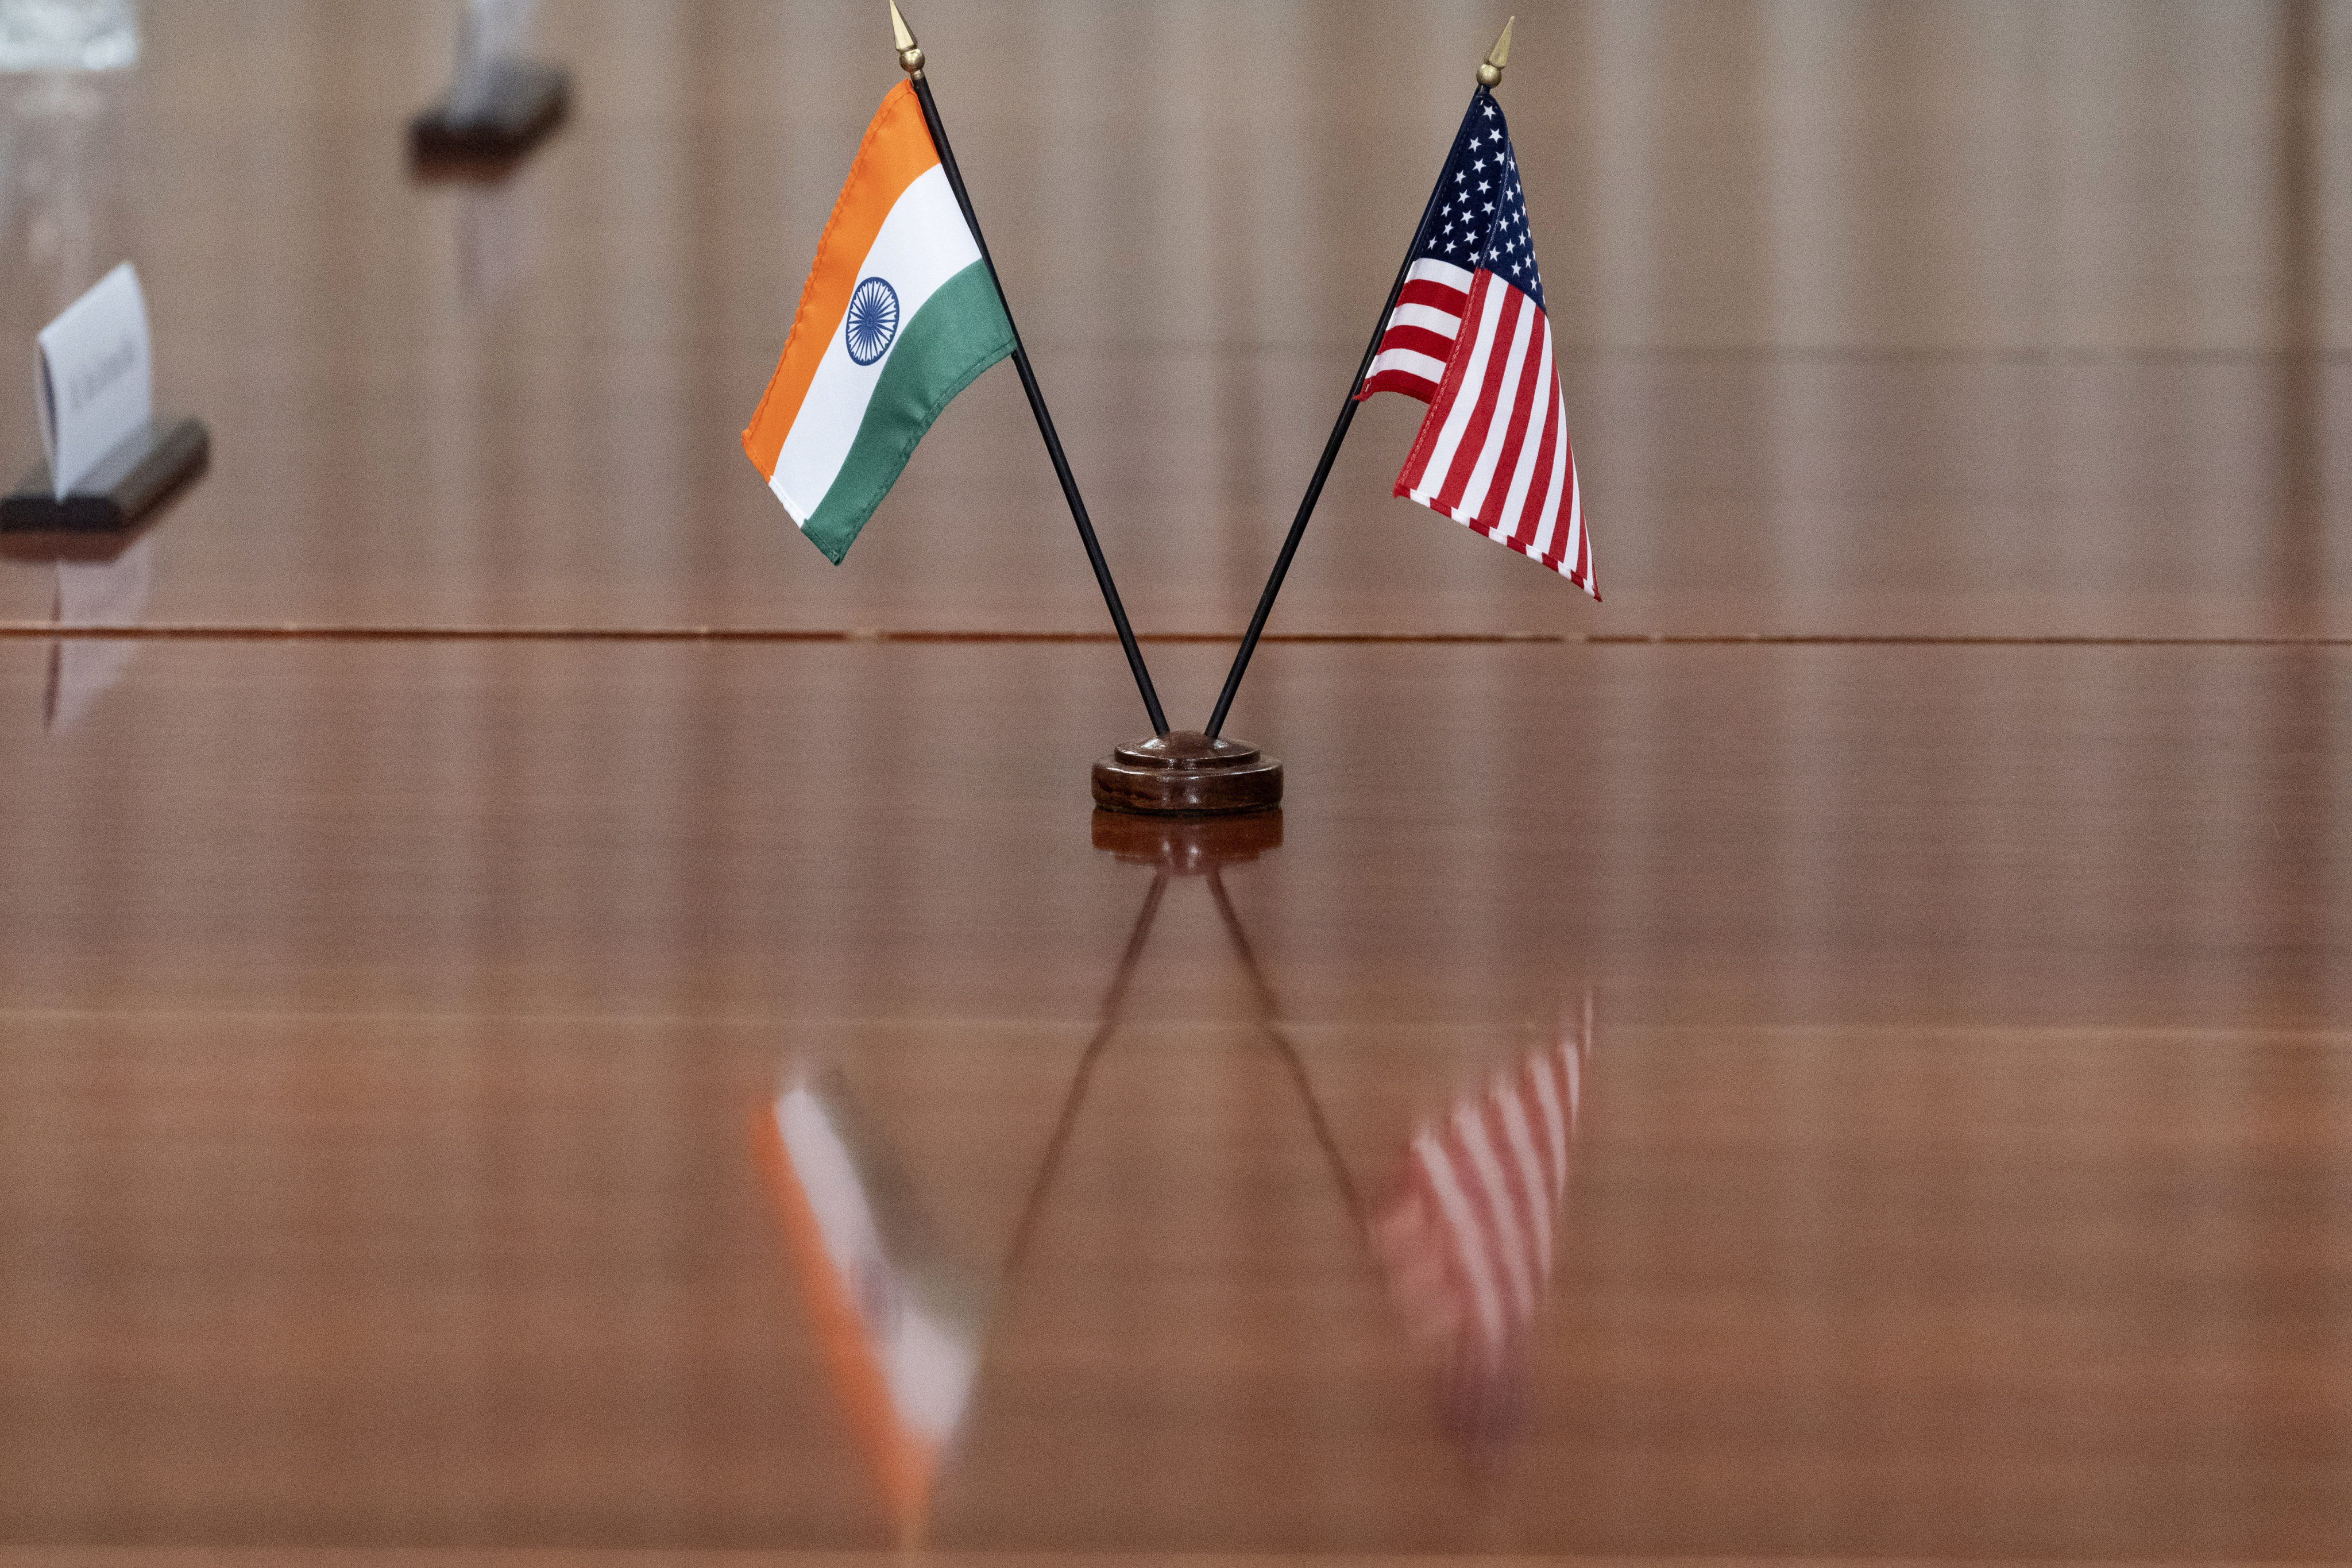 At a hearing in Washington on Wednesday, a US senator called claims that New Delhi has targeted Sikh separatists “highly disturbing”. Photo: AP